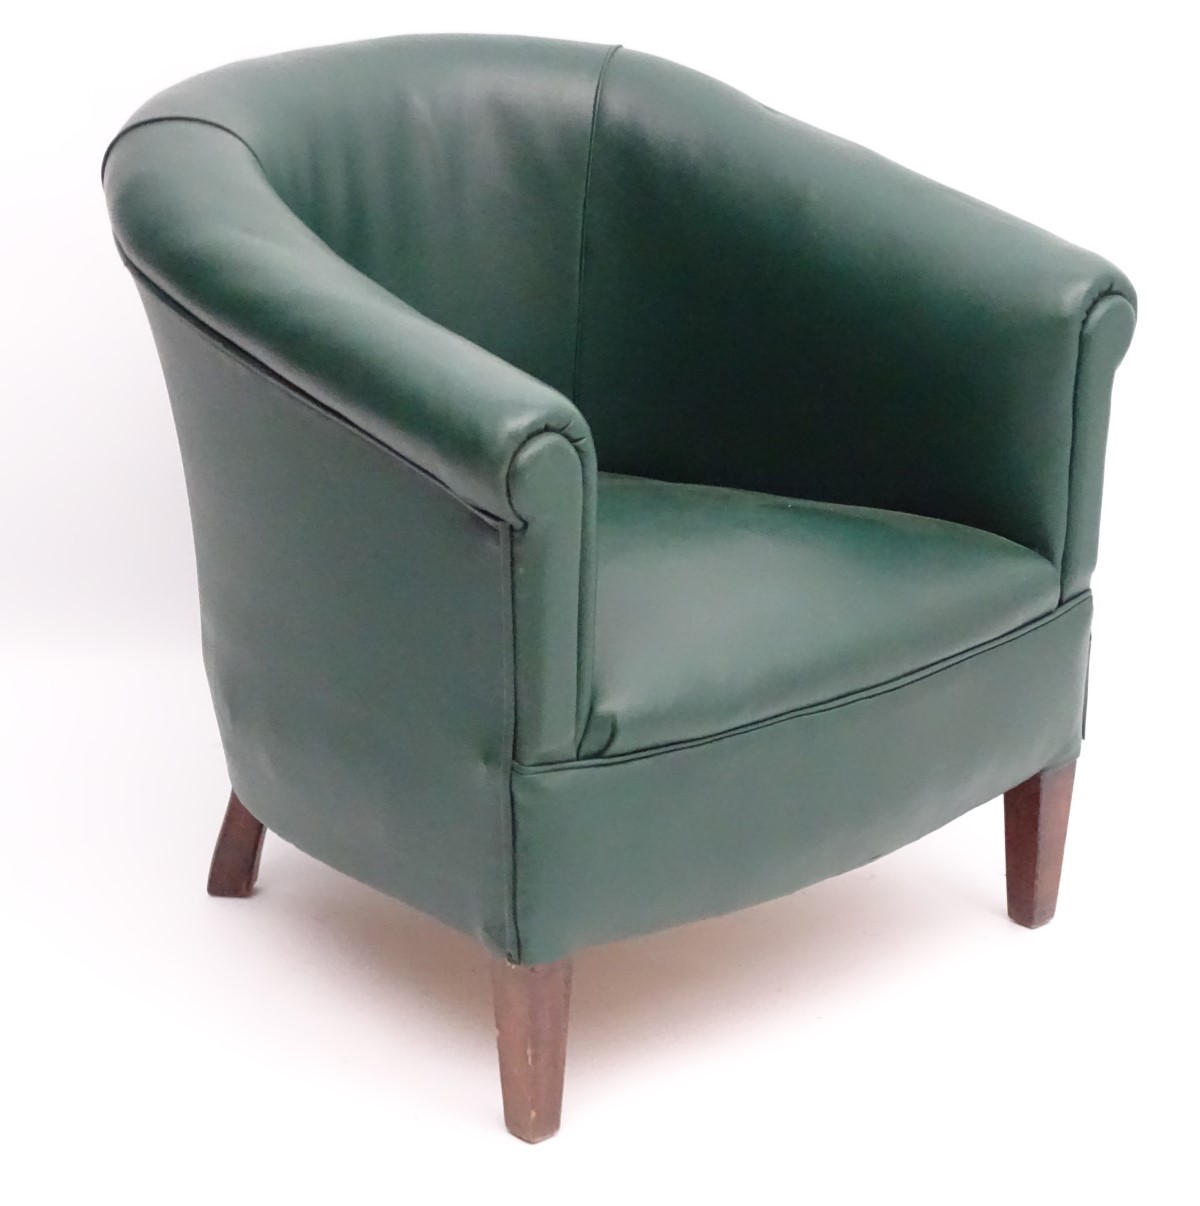 A mid 20thC green tub chair standing on squared tapering legs. 28” wide x 25” deep.